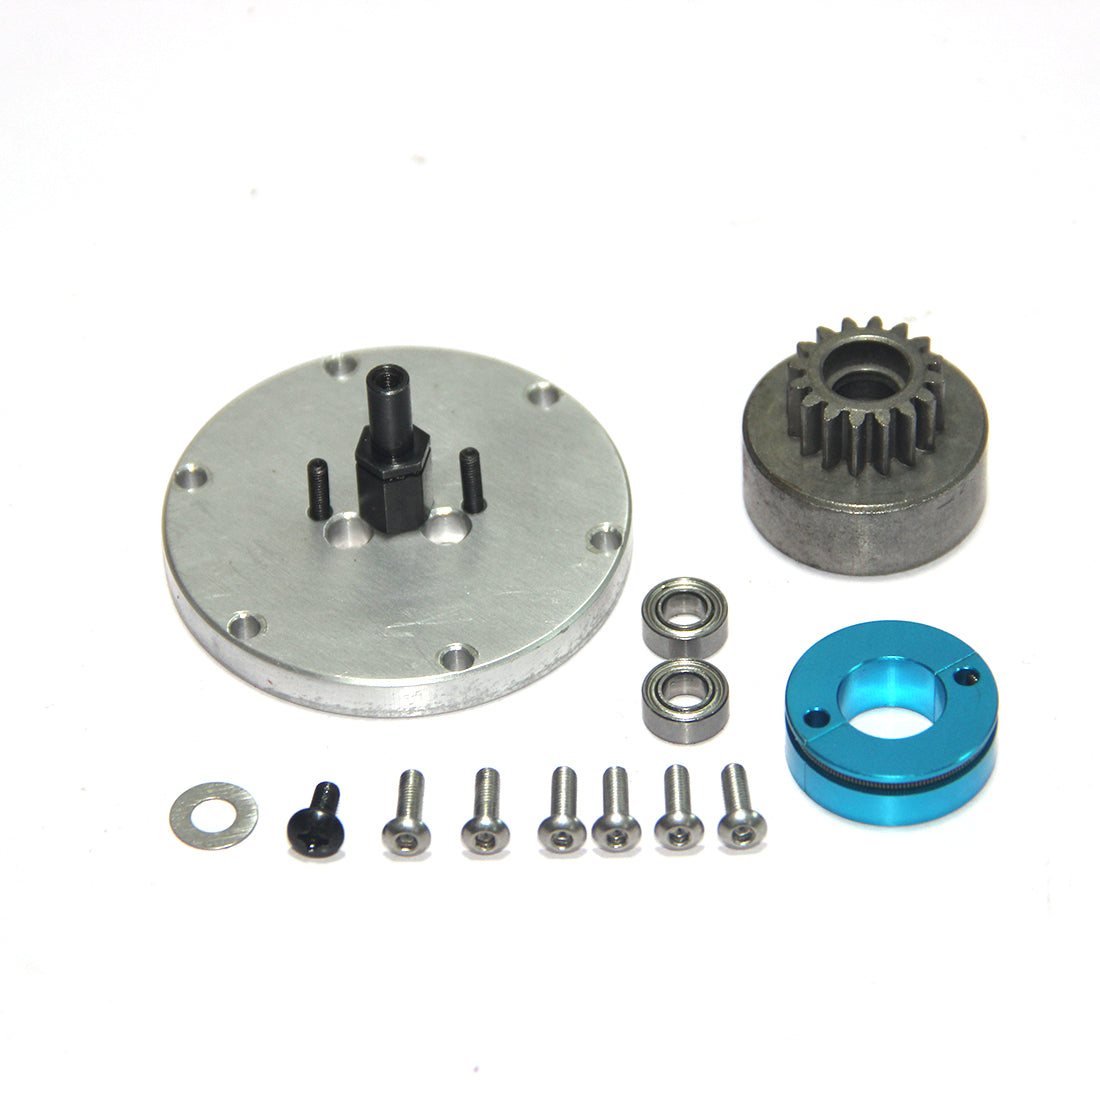 Single Geared Clutch Kit for CISON FL4-175  In-Line Four-Cylinder Engine Model Modification - stirlingkit